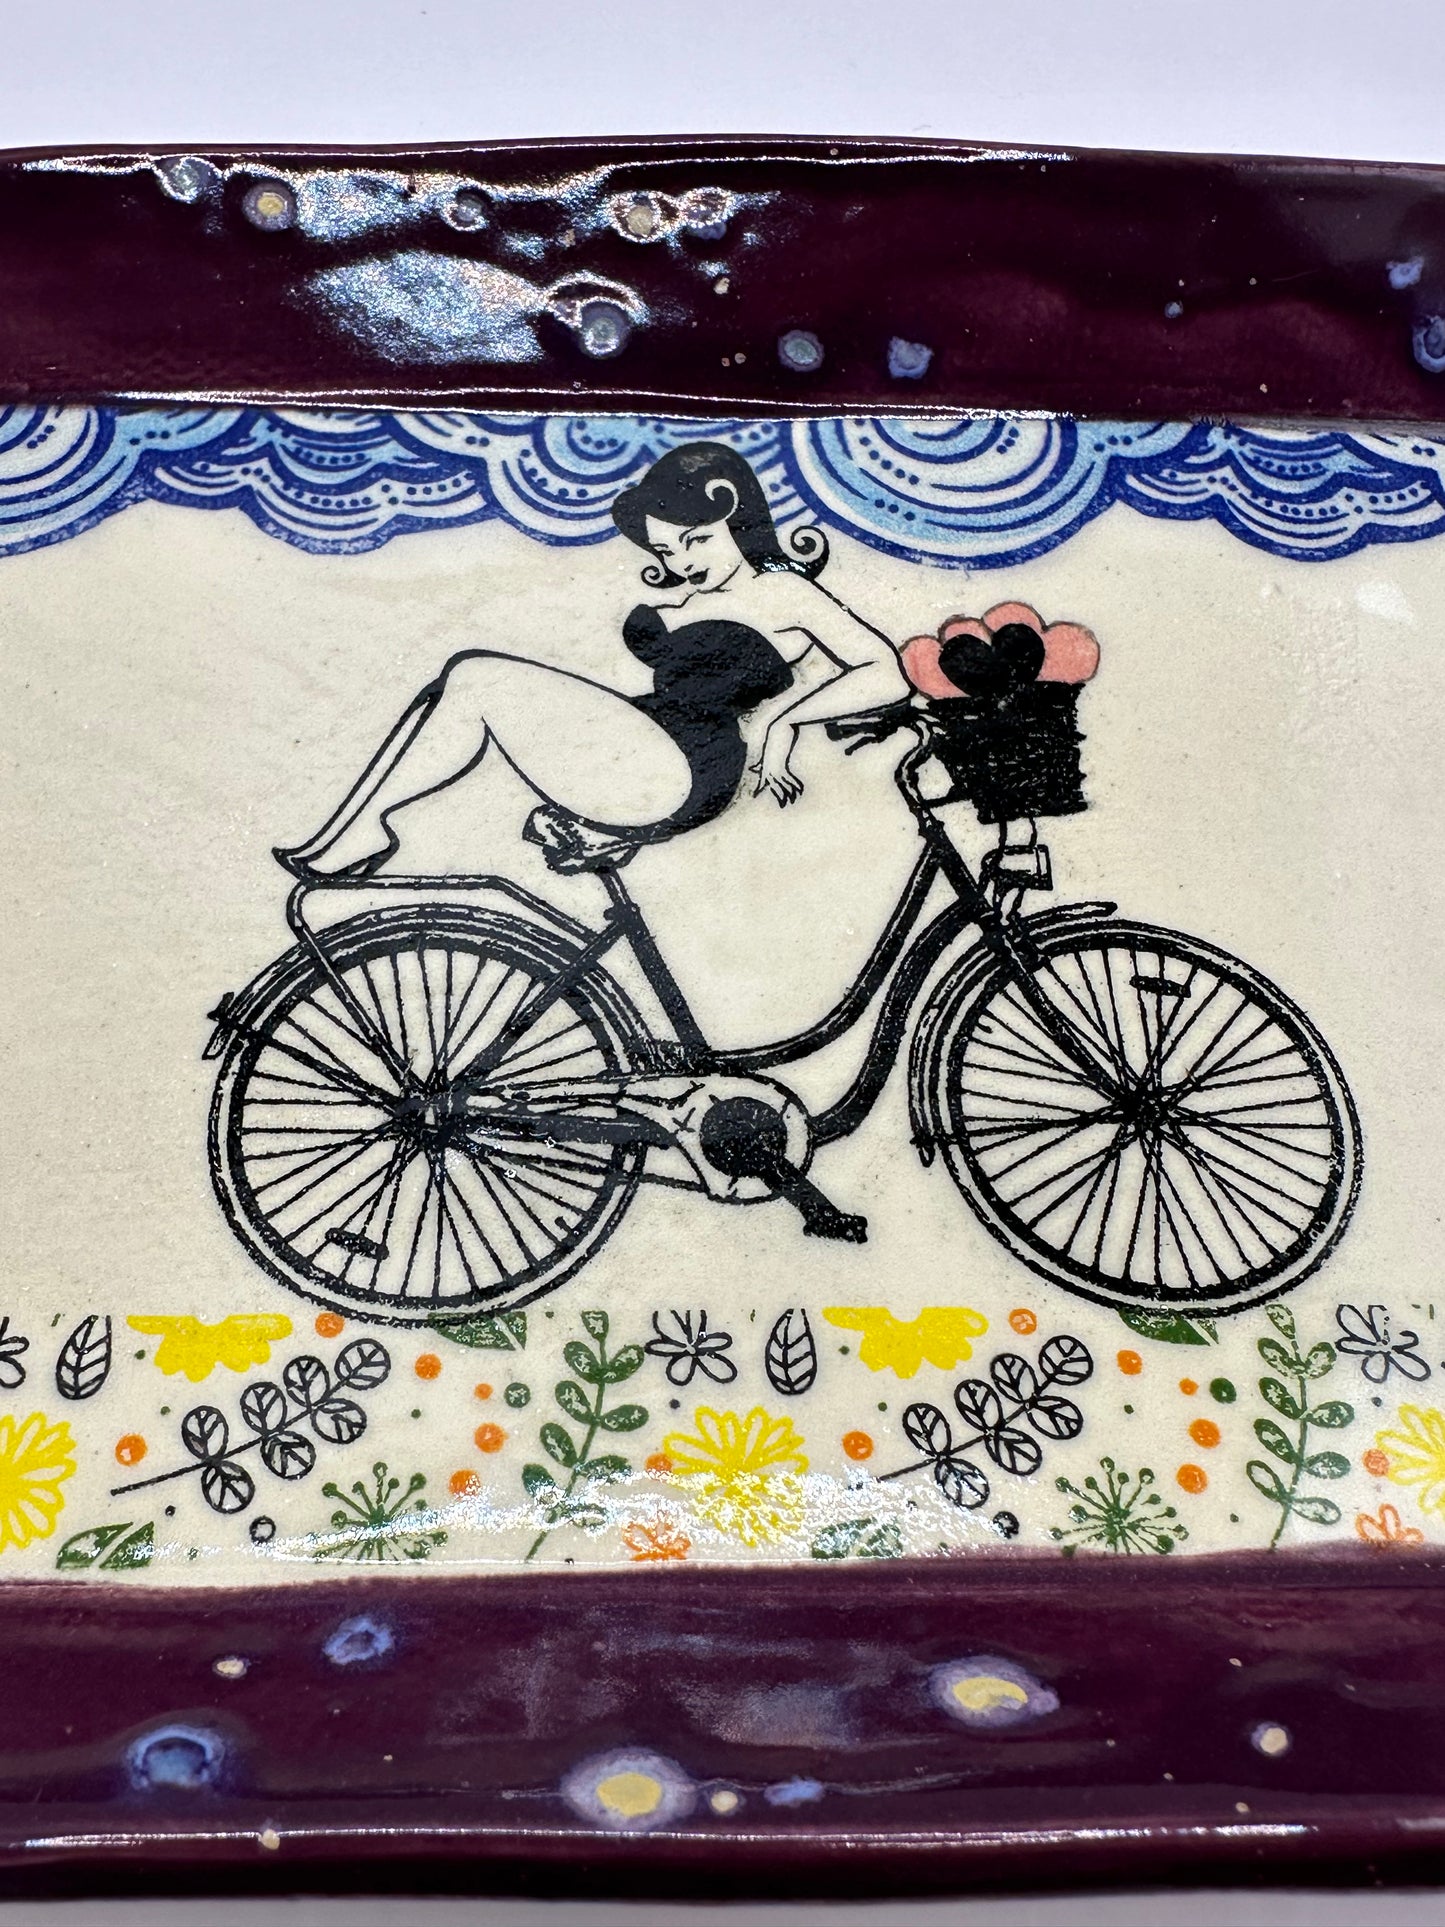 Oblong Dish - Pinup Heart Basket Bicycle (footed)